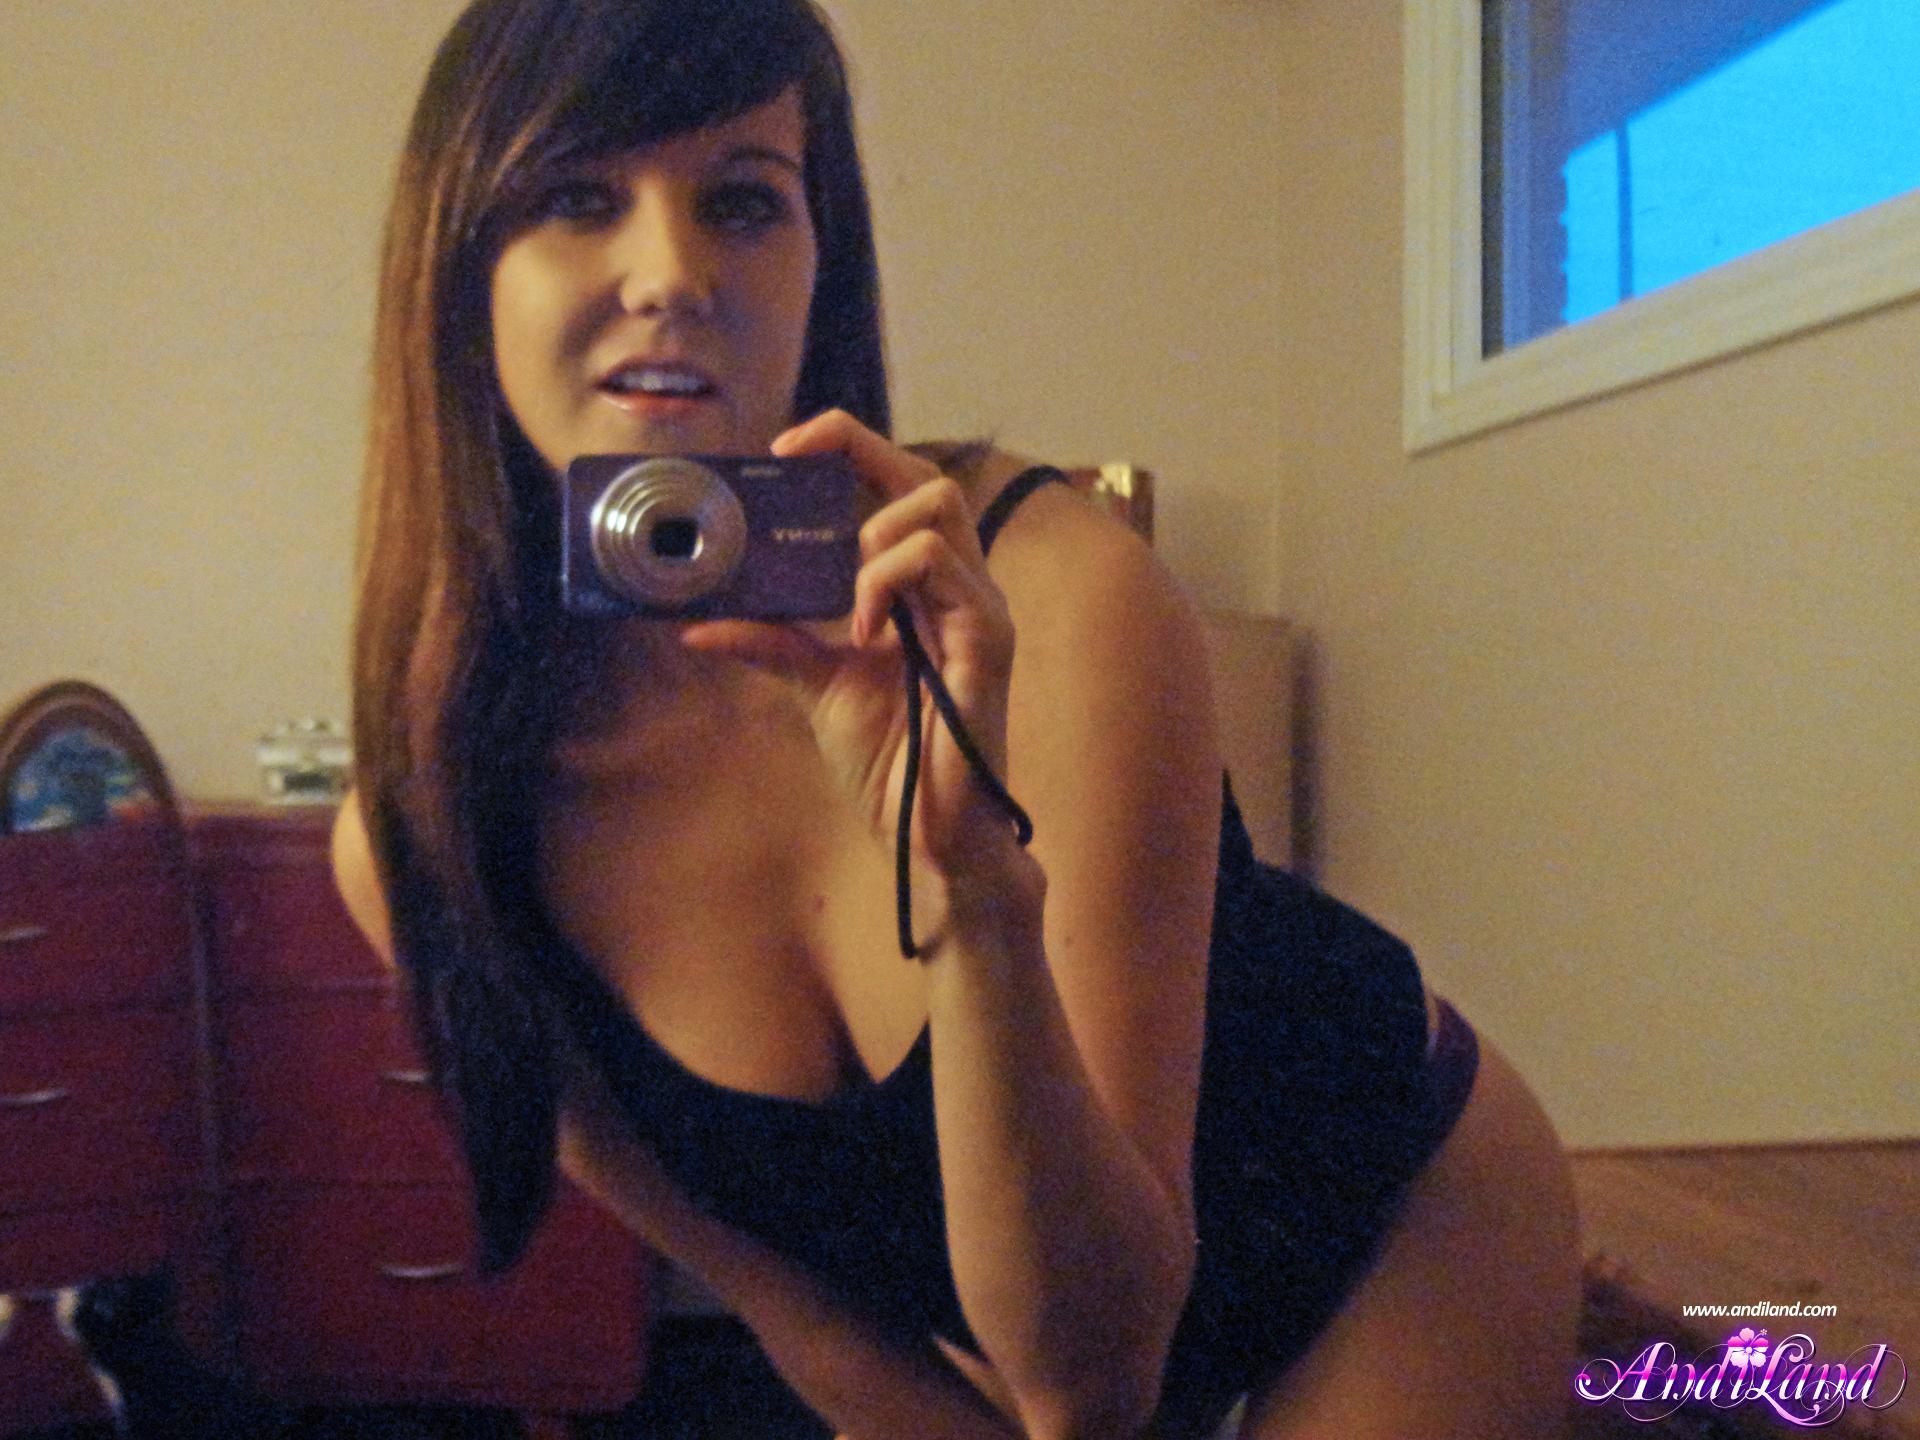 Pictures of Andi Land giving you some sexy self shots with her camera